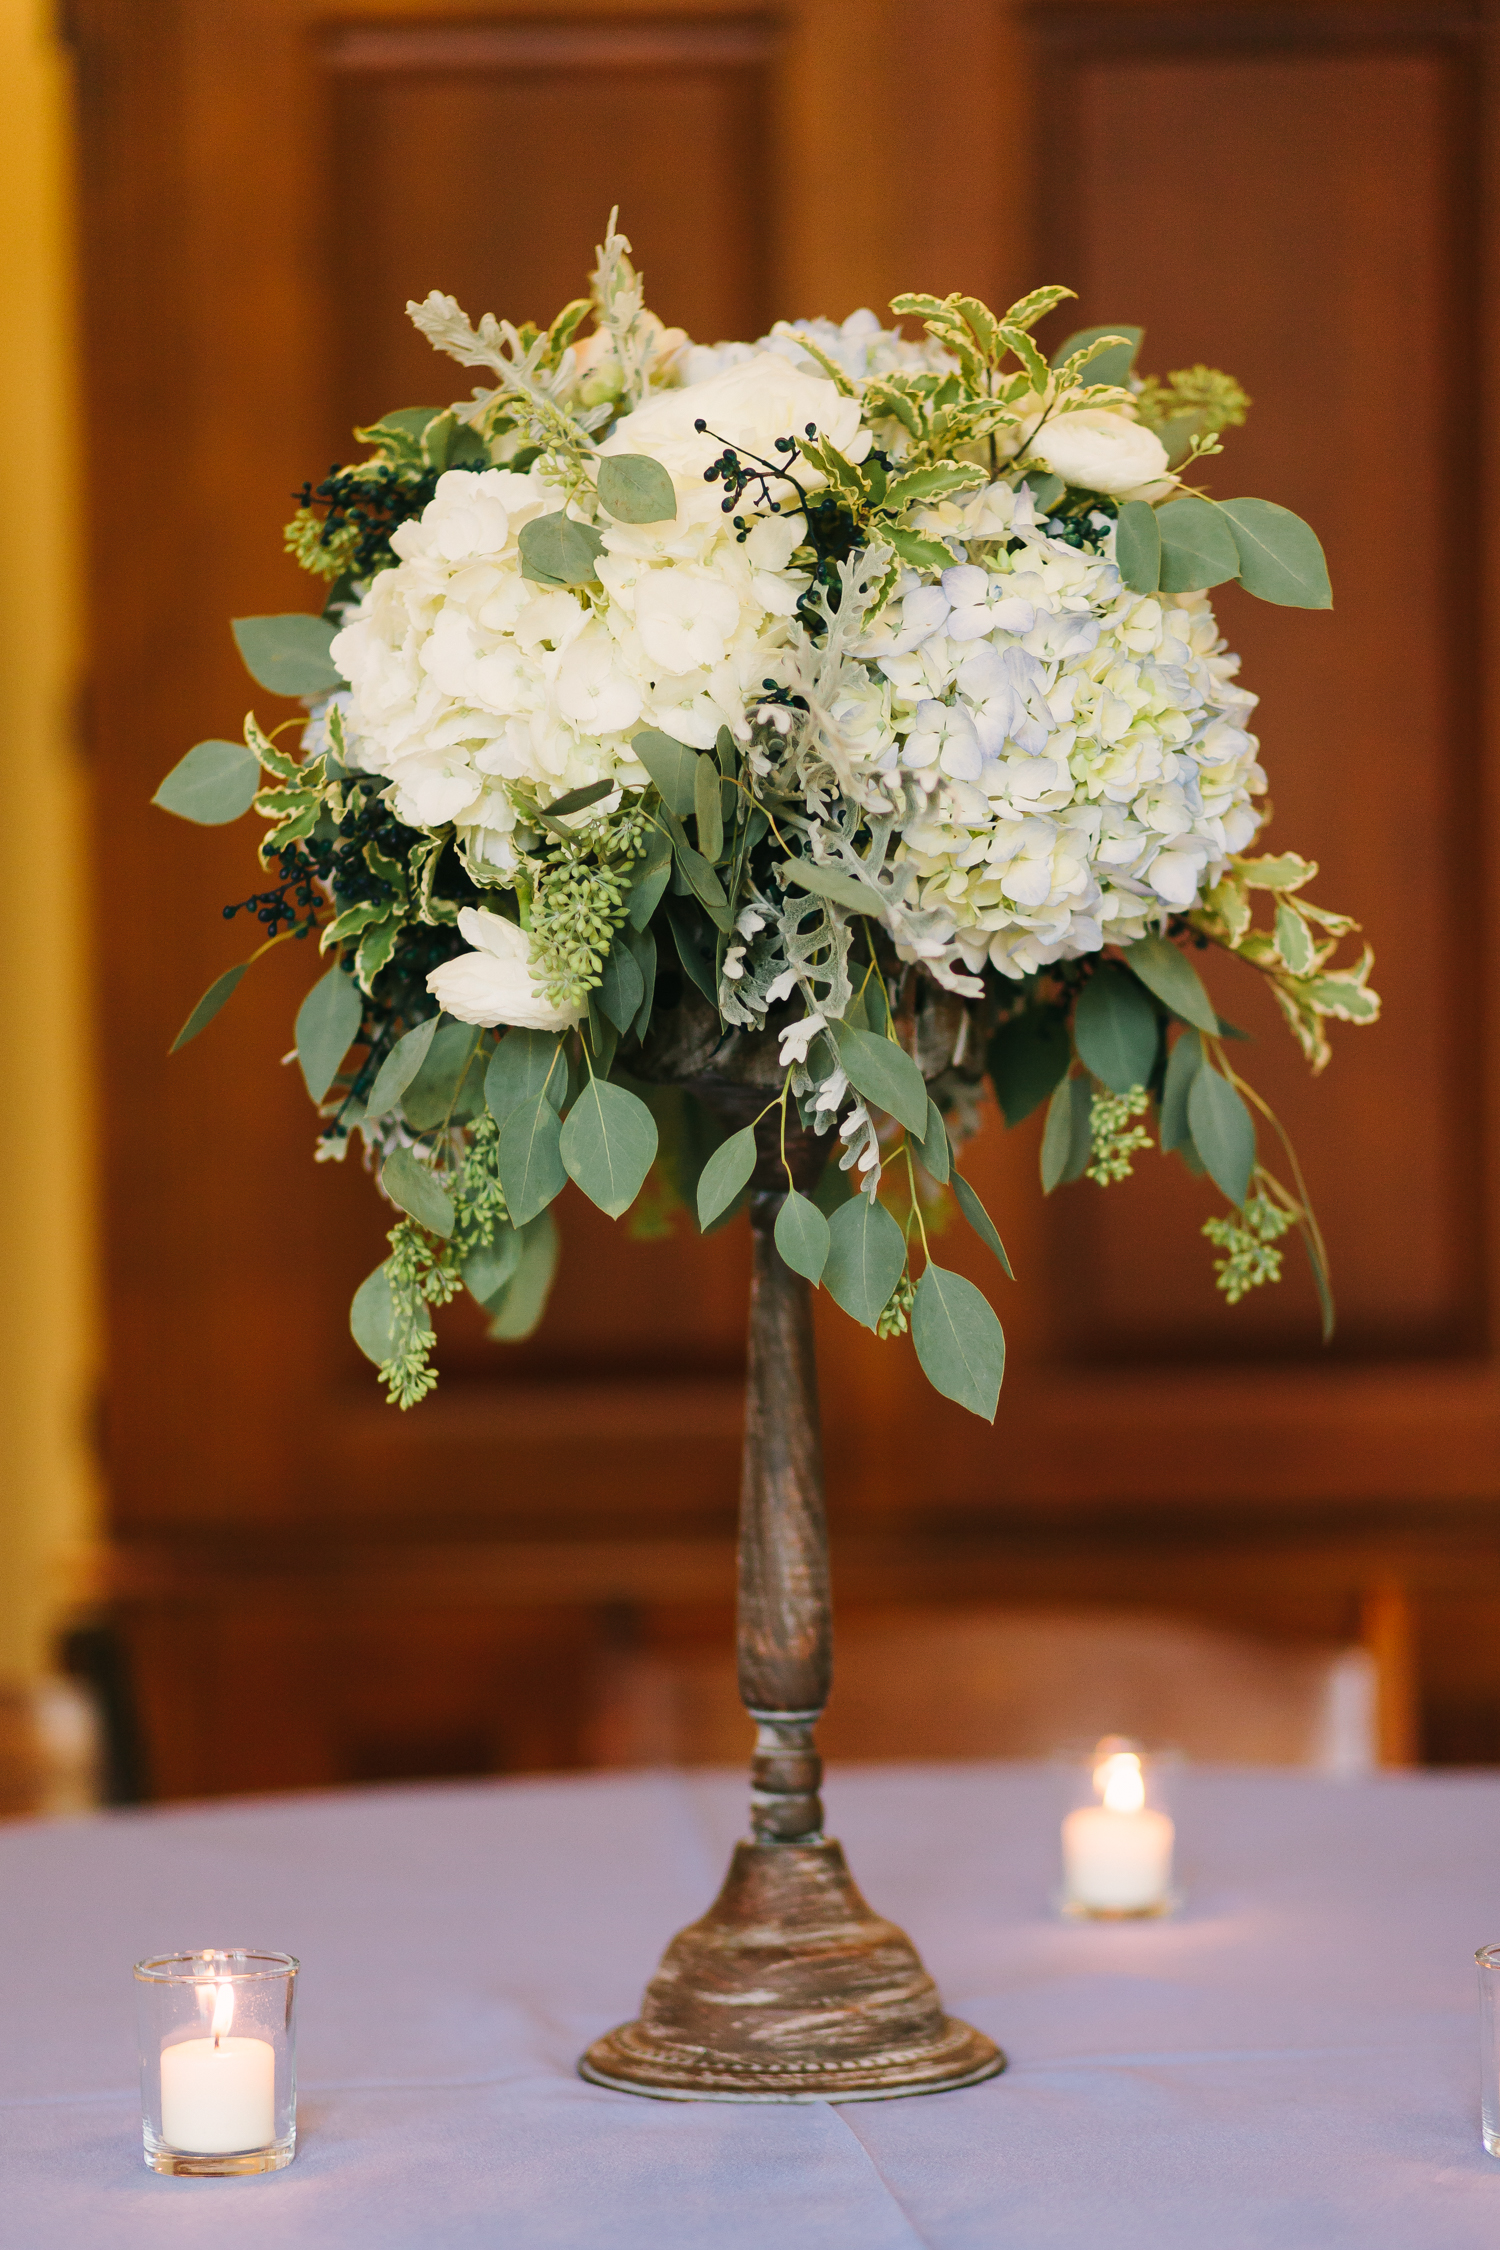 Elevated floral arrangement with blue and white hydrangeas, privet berries, and lush greenery